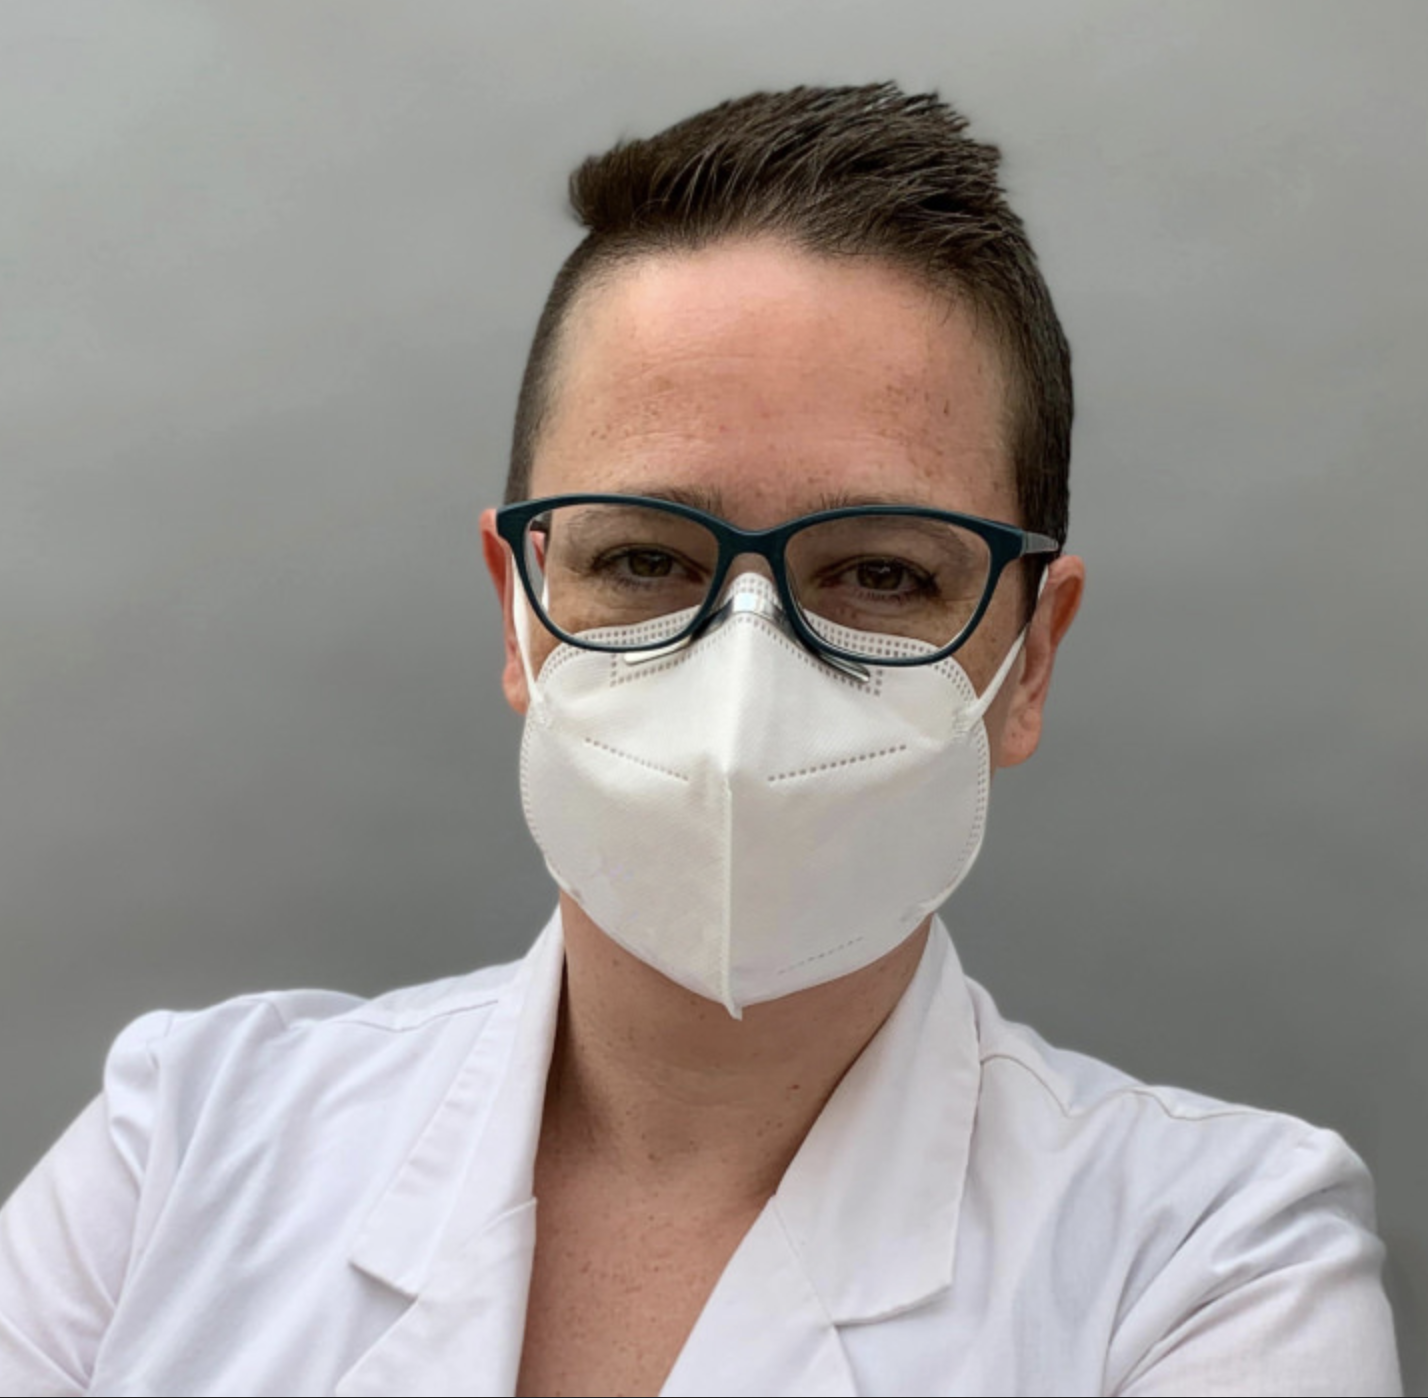 Picture of Sarah Davis in glasses and smiling beneth a white face mask and wearing a medical white coat against a light grey wall